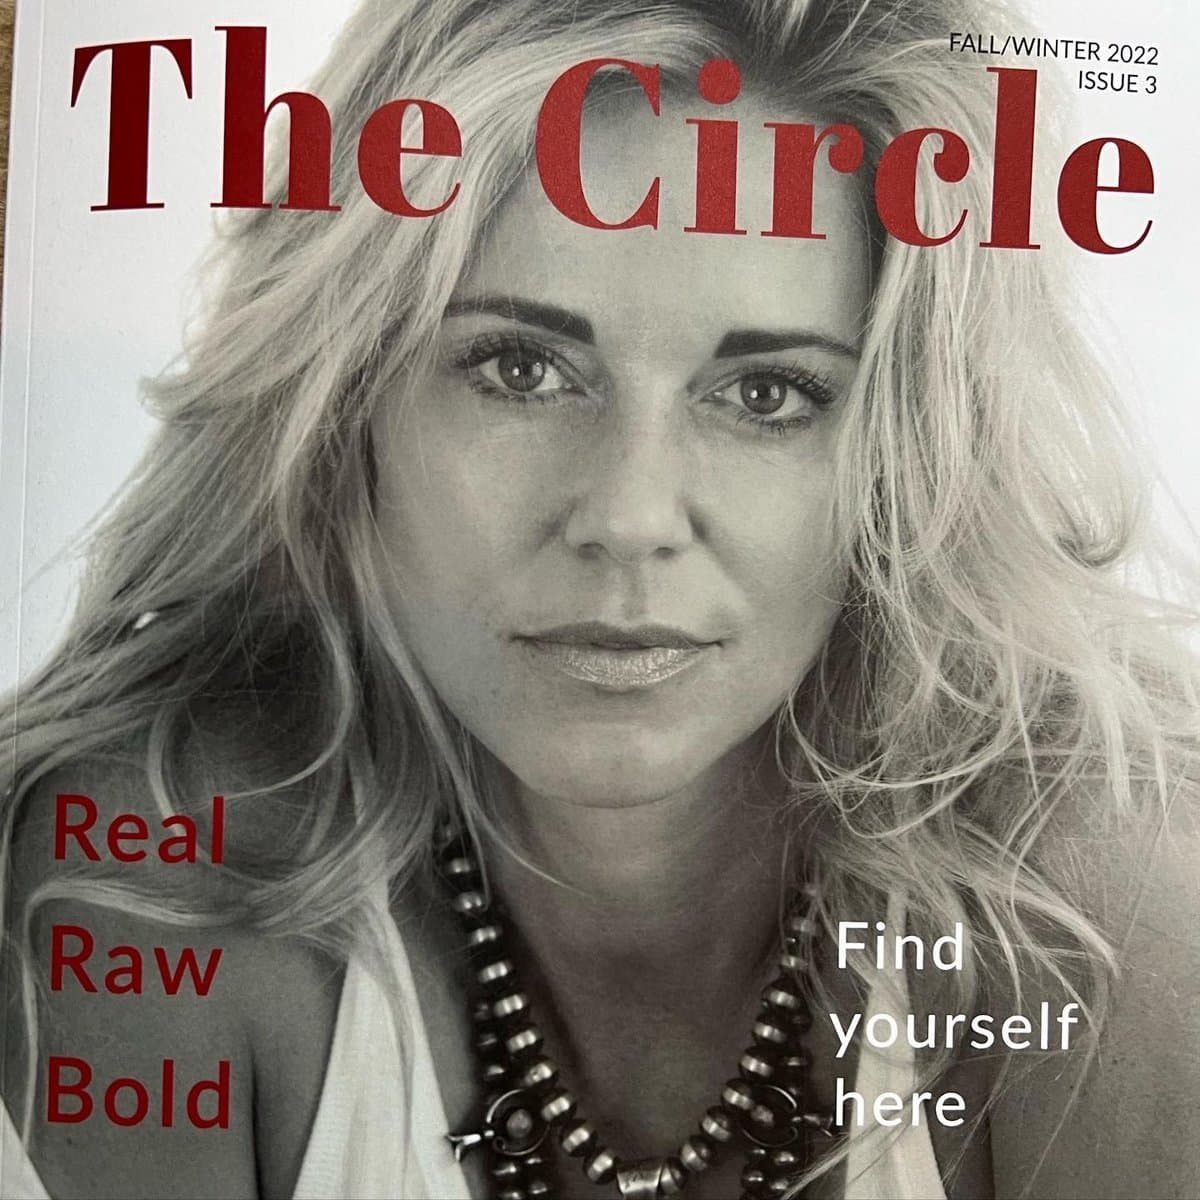 Candace Tells Her Story in “The Circle” Magazine